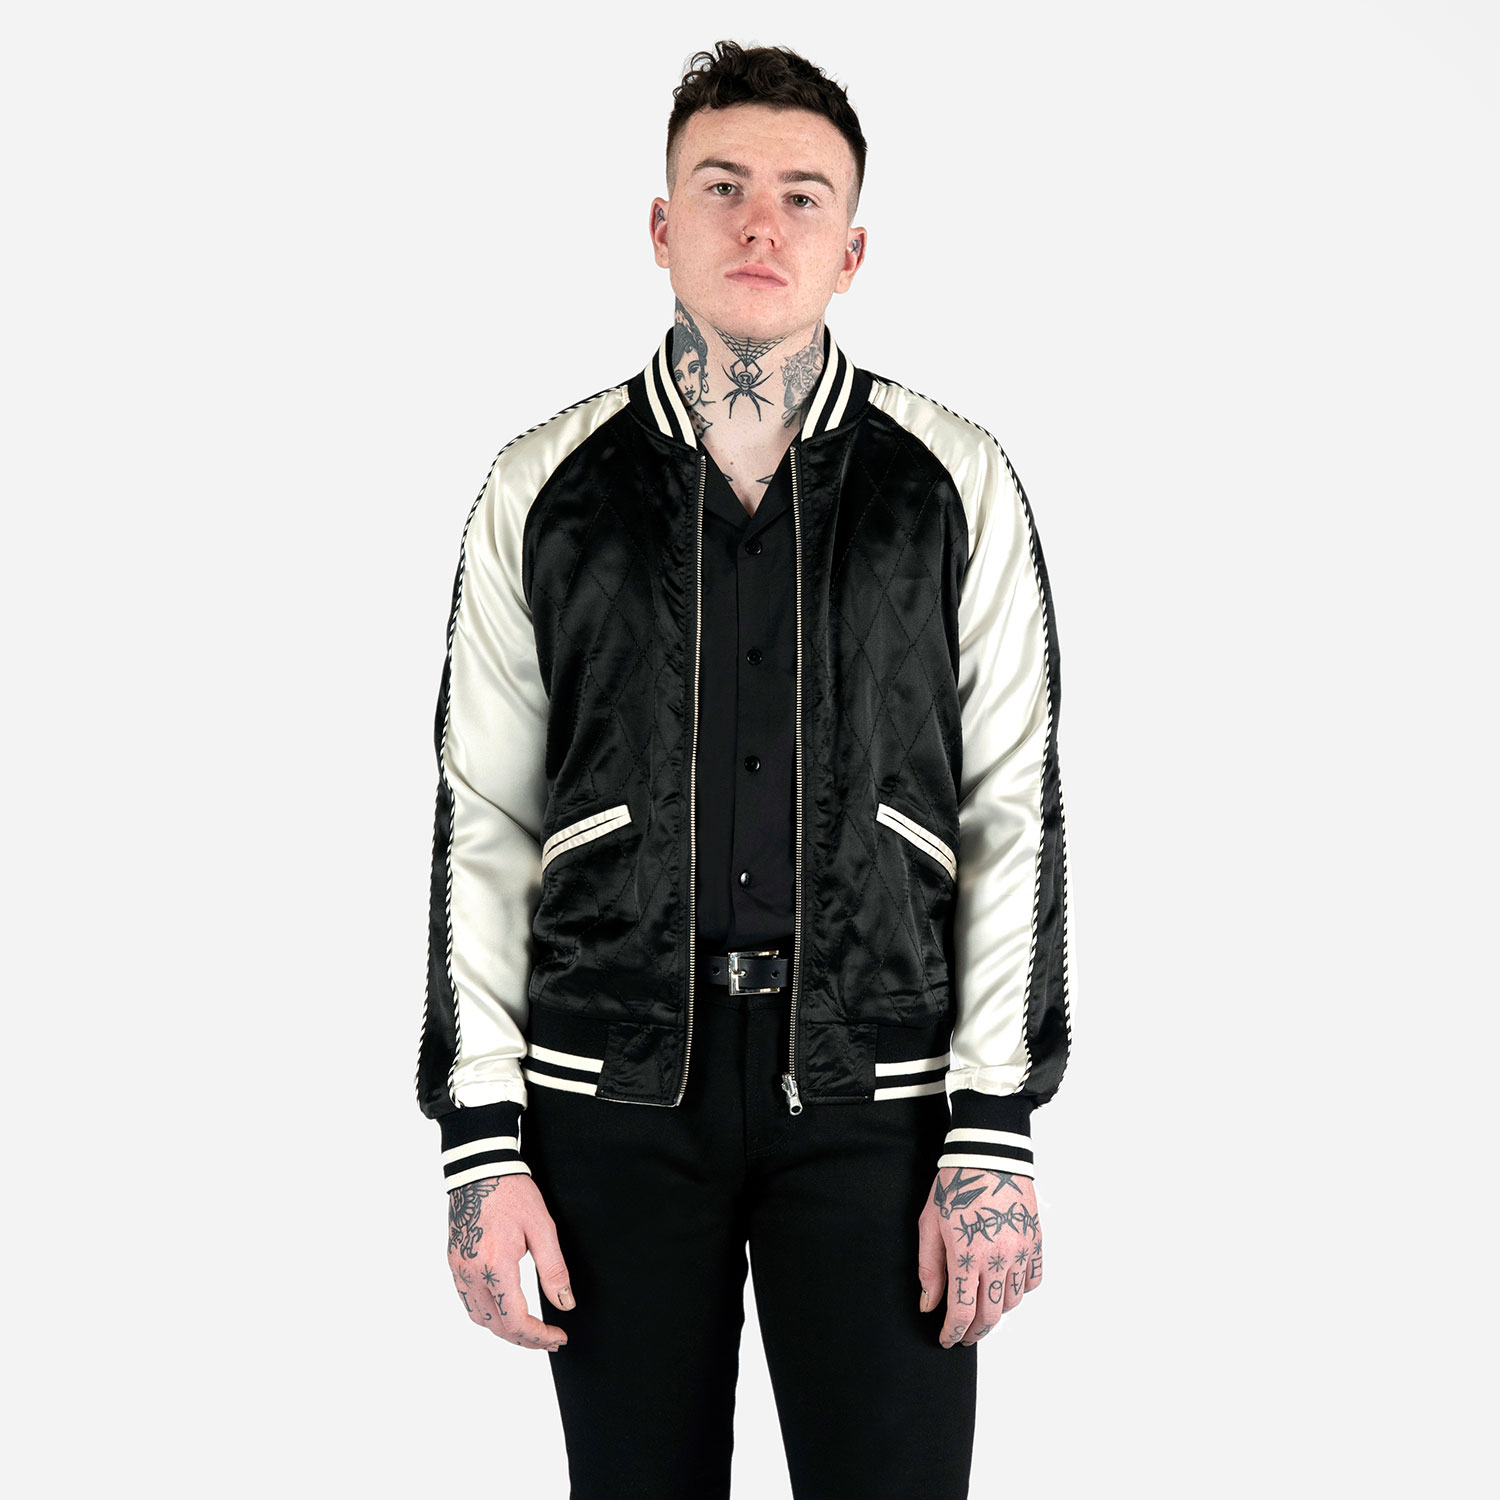 Straight to Hell Boogie Reversible Souvenir Jacket